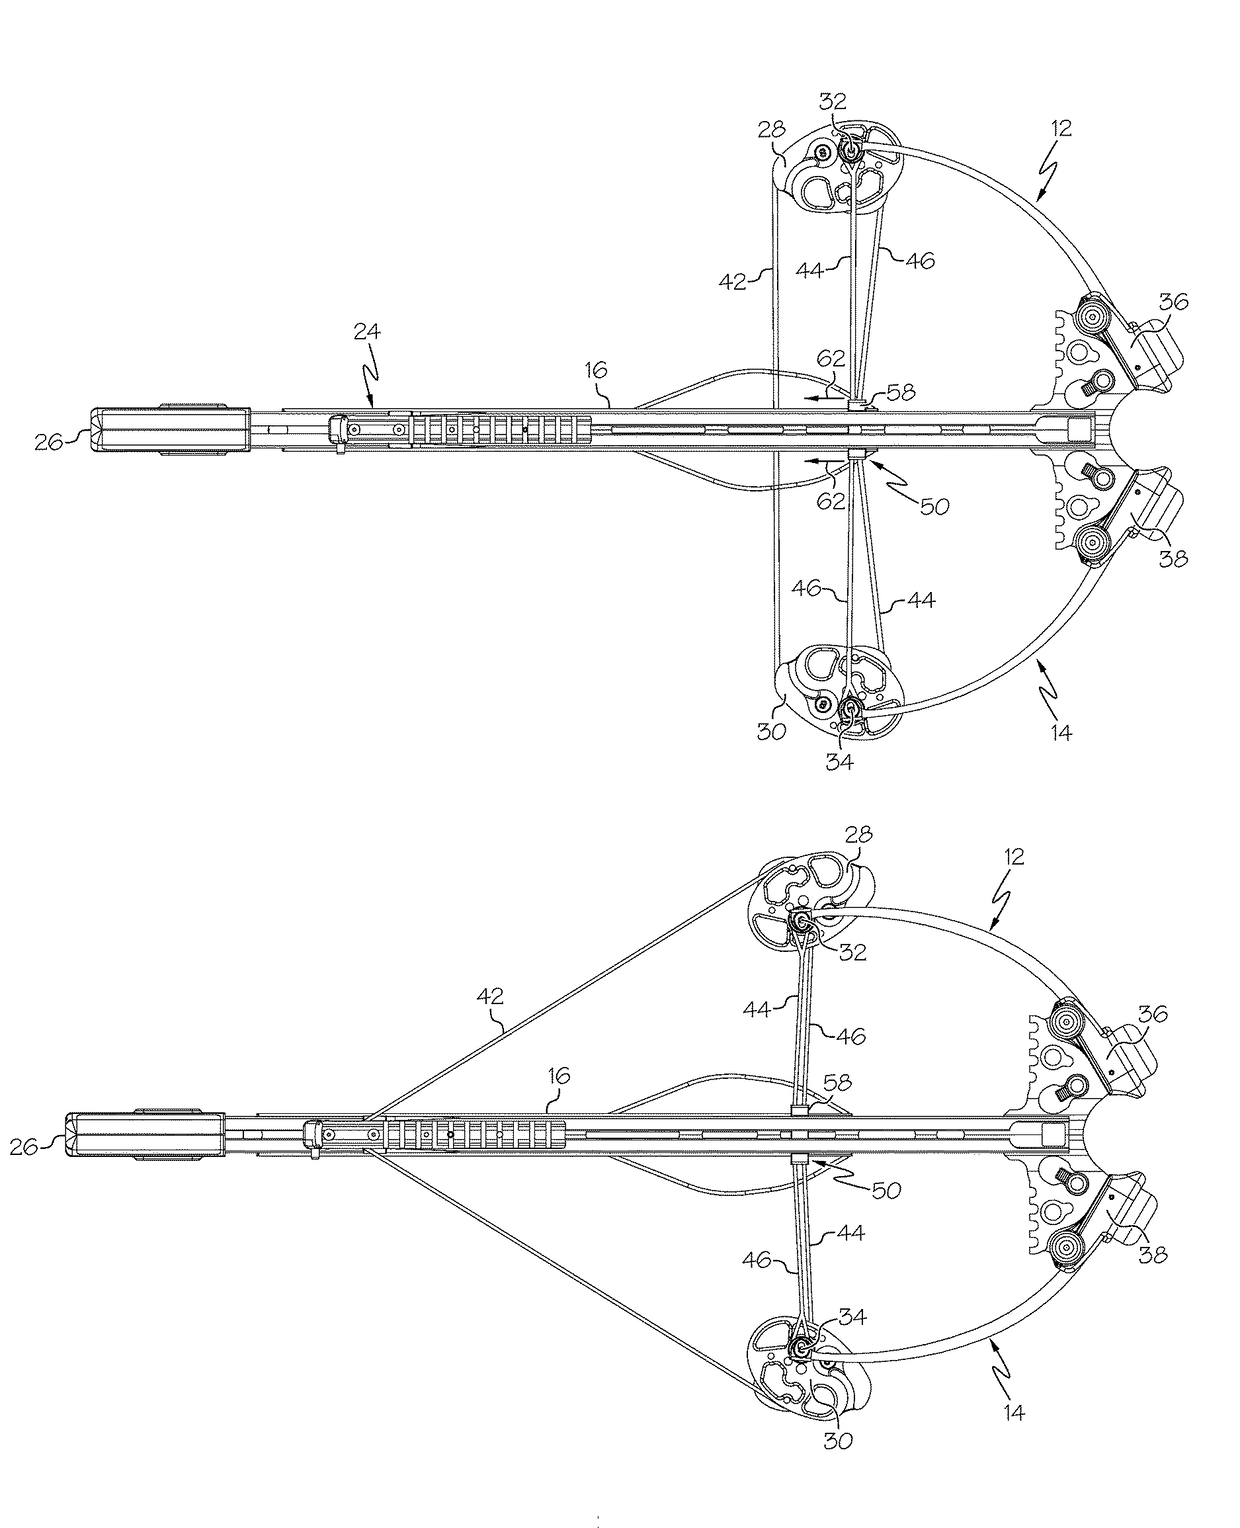 High let-off crossbow